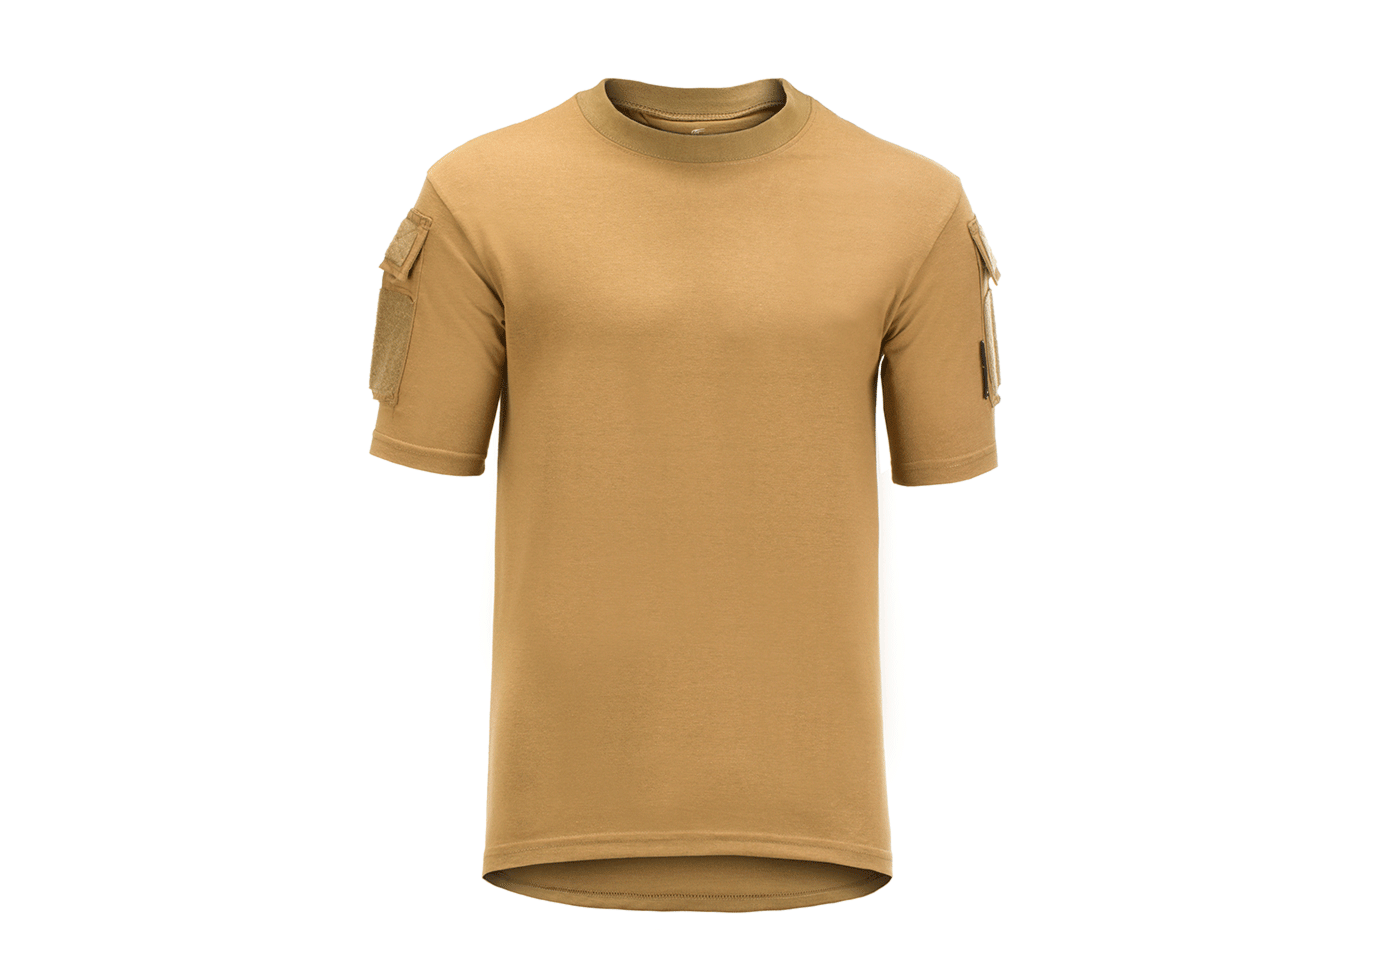 Invader Gear Tactical Tee Coyote